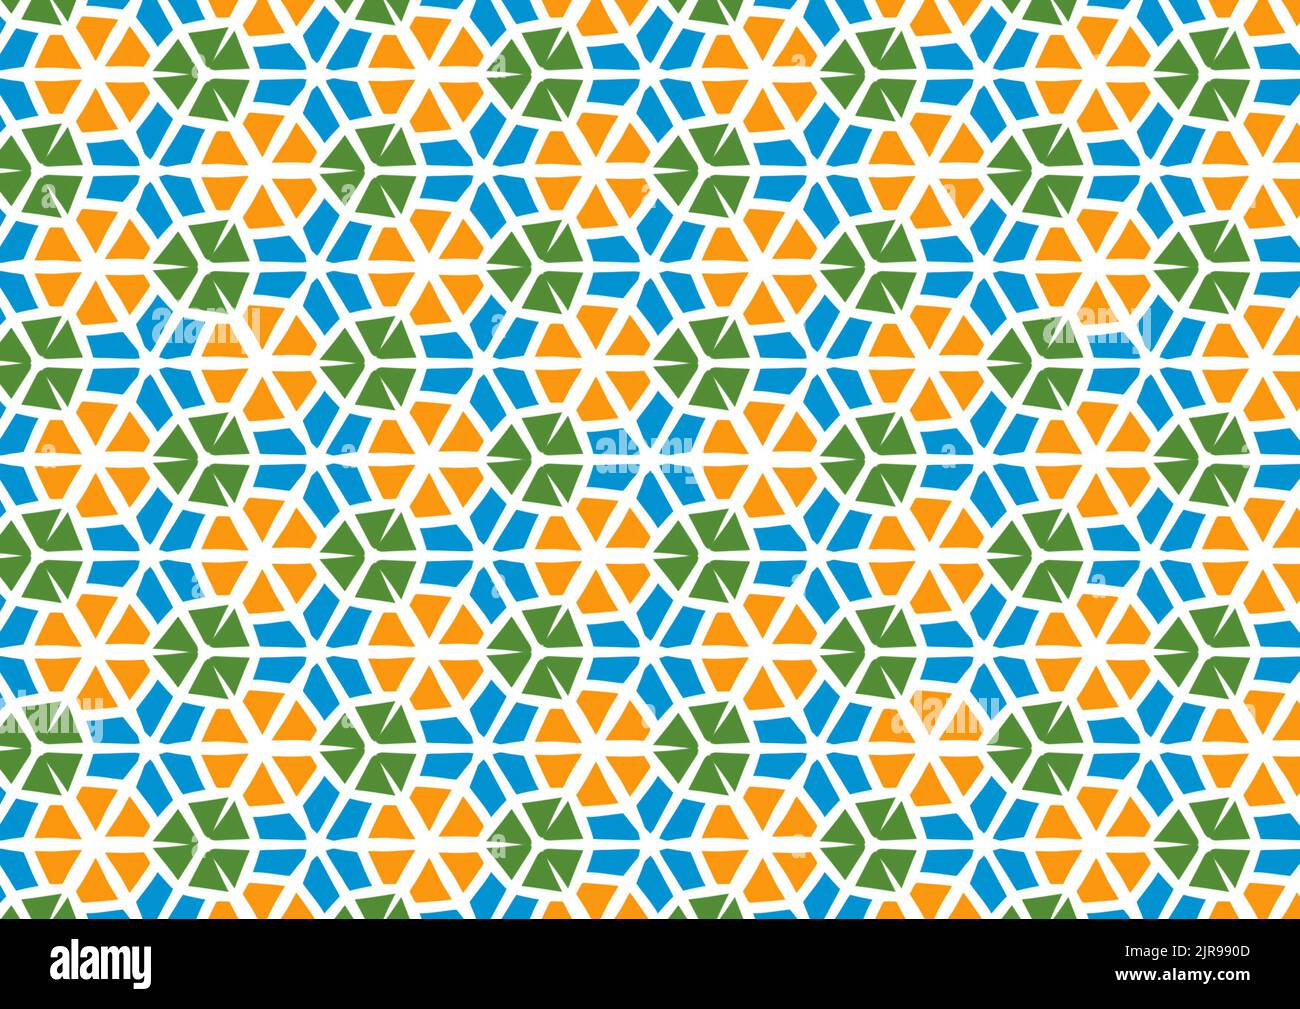 seamless pattern with colorful geometry shapes Stock Photo